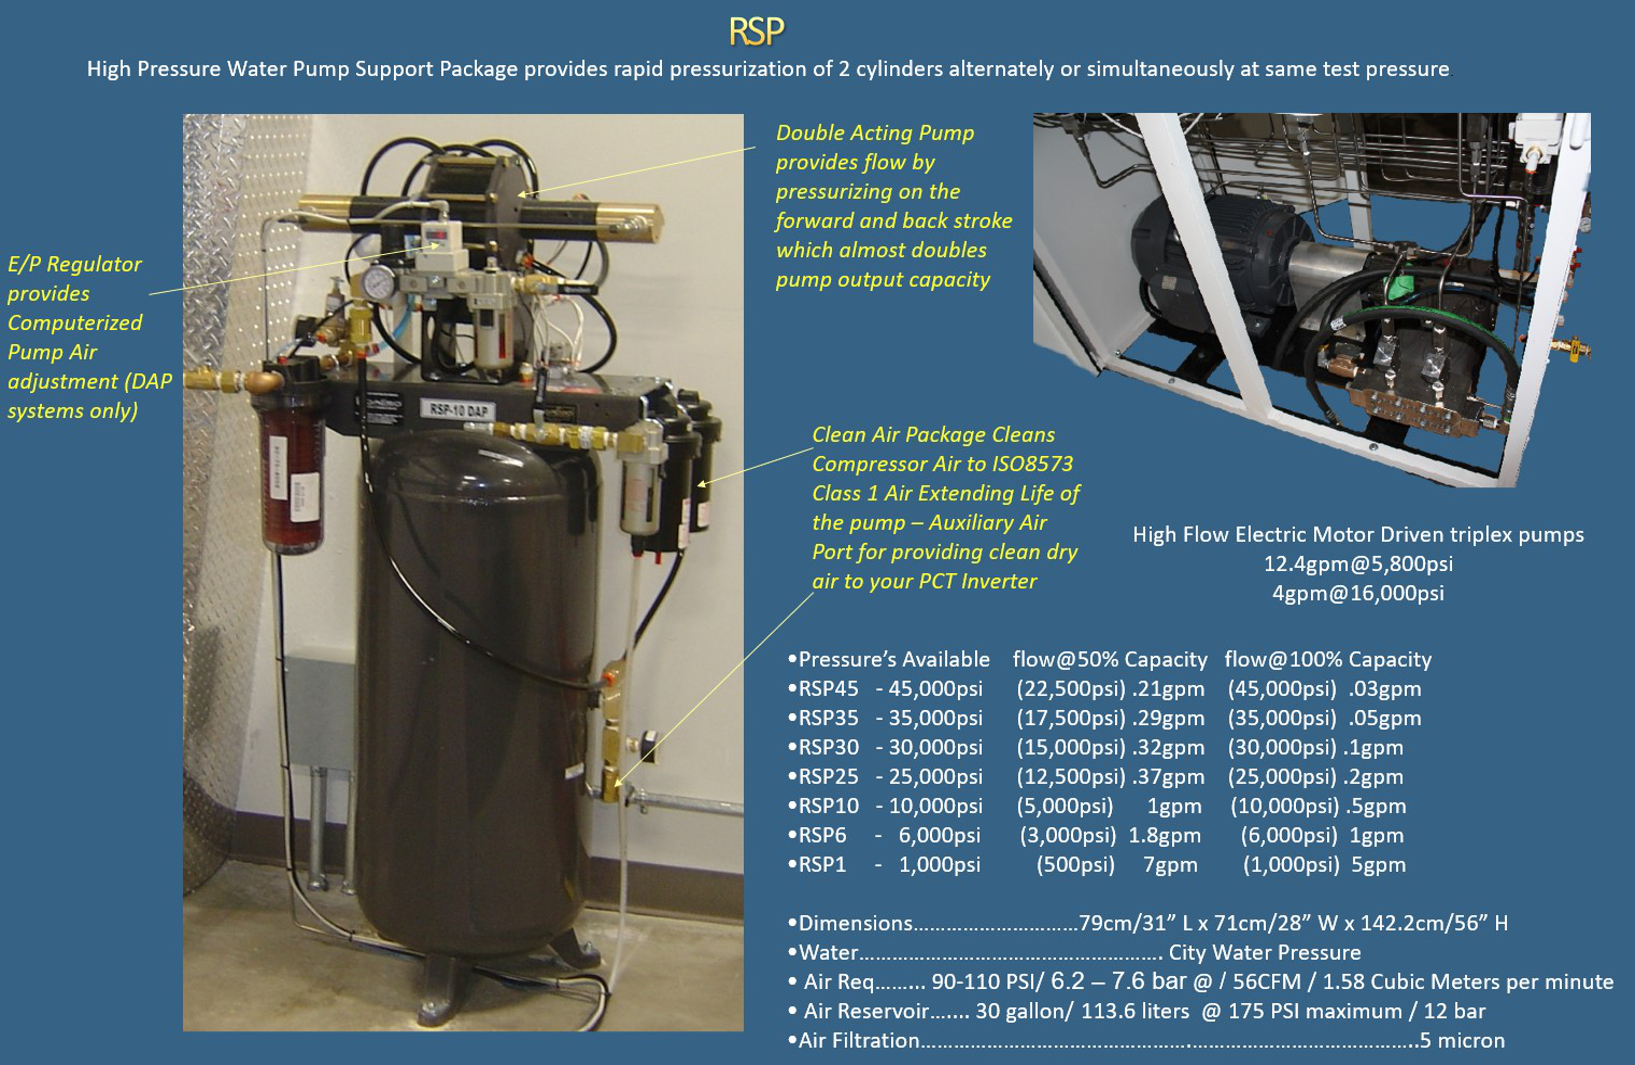 High Pressure Water Pump Support Package